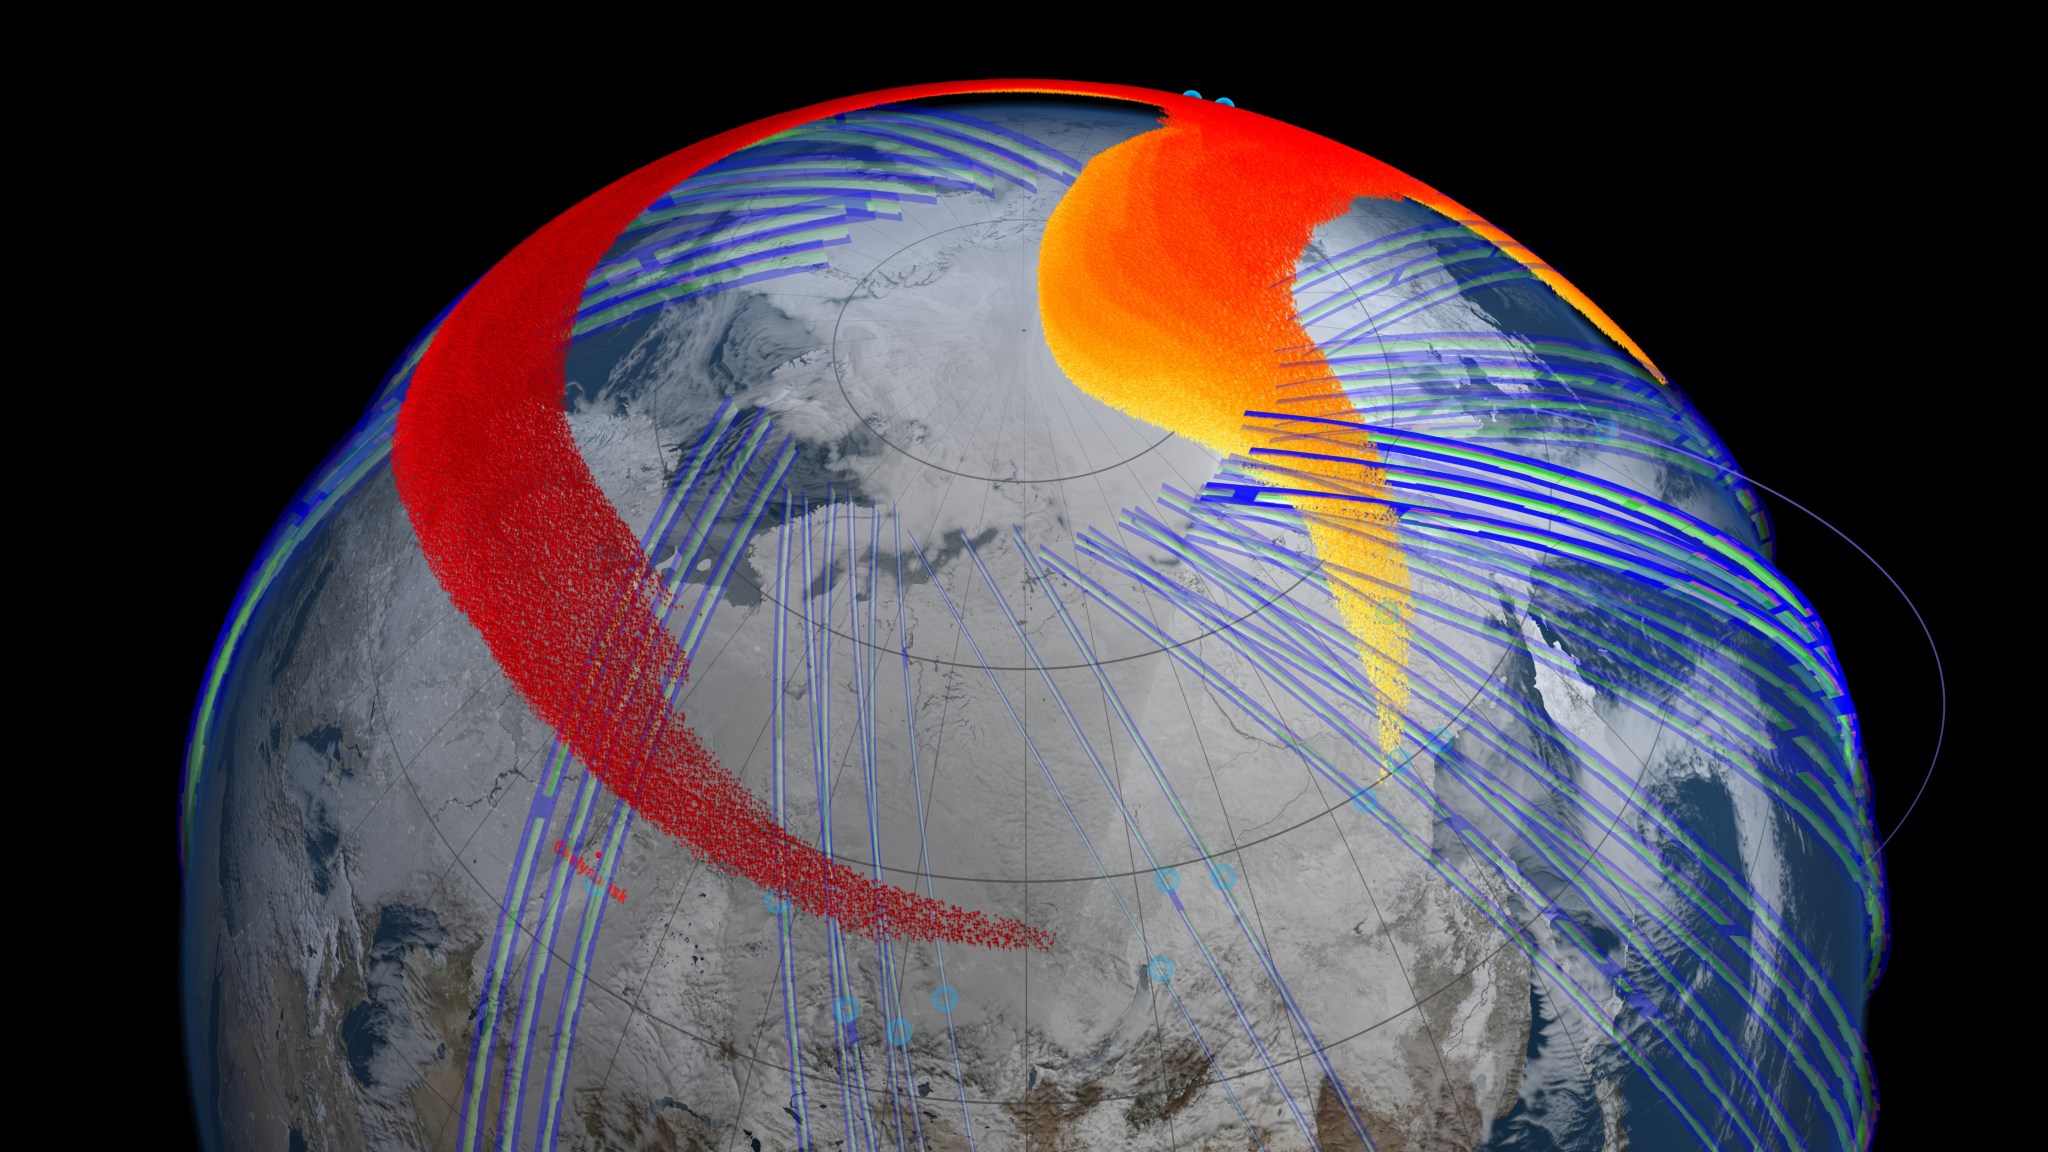 Model and satellite data show that four days after the bolide explosion, the faster, higher portion of the plume (red) had snaked its way entirely around the northern hemisphere and back to Chelyabinsk, Russia.